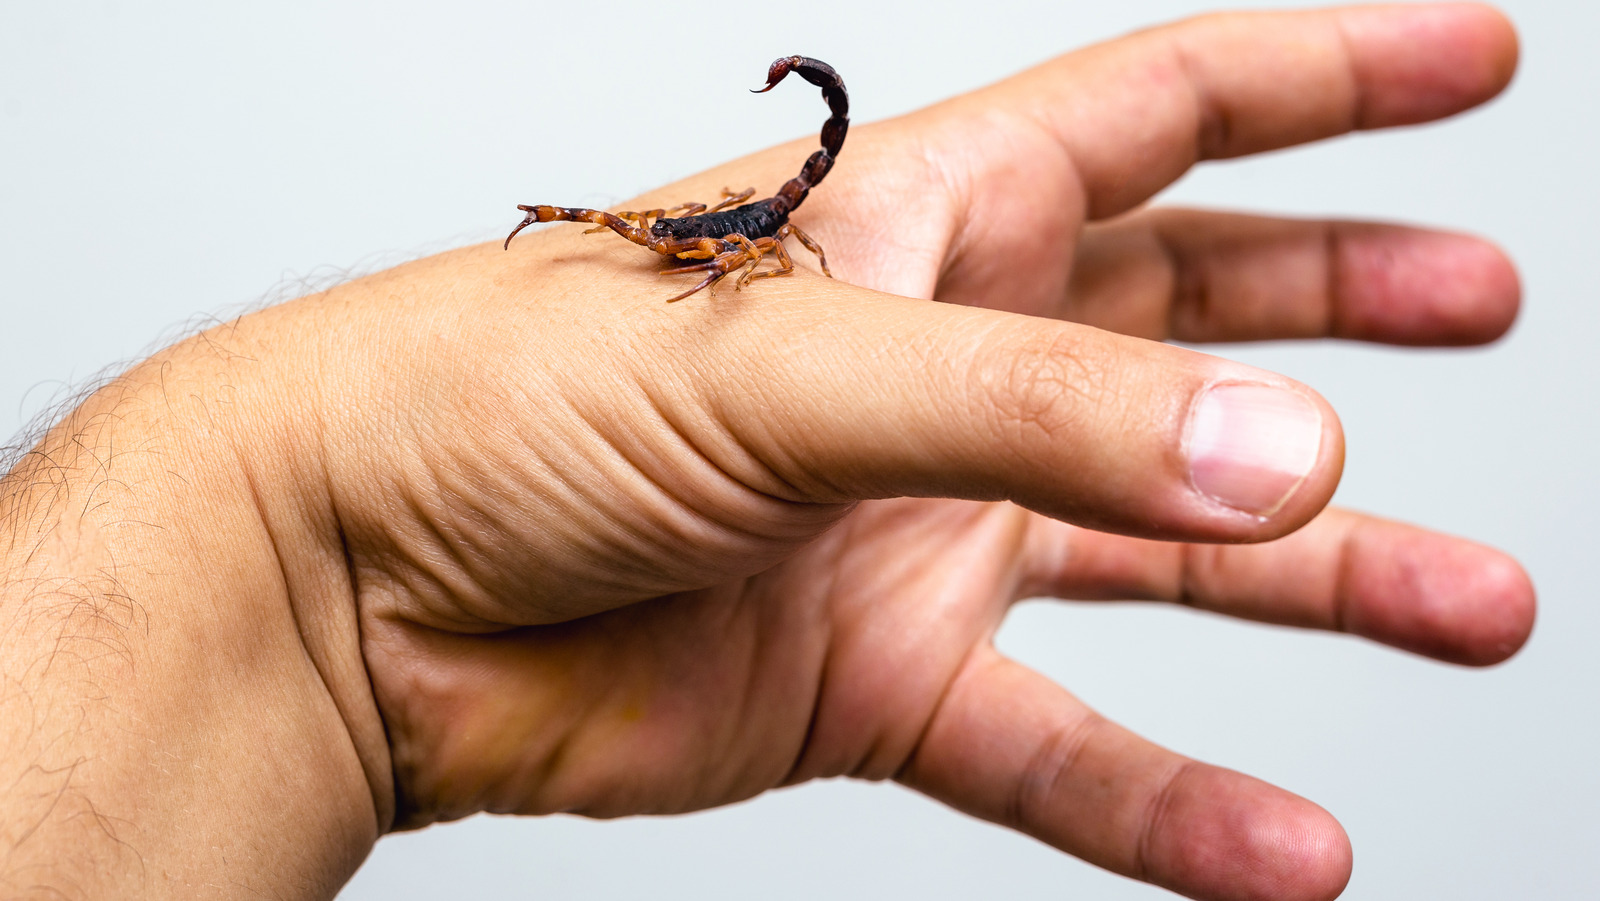 What You Need to Know About Scorpion Stings